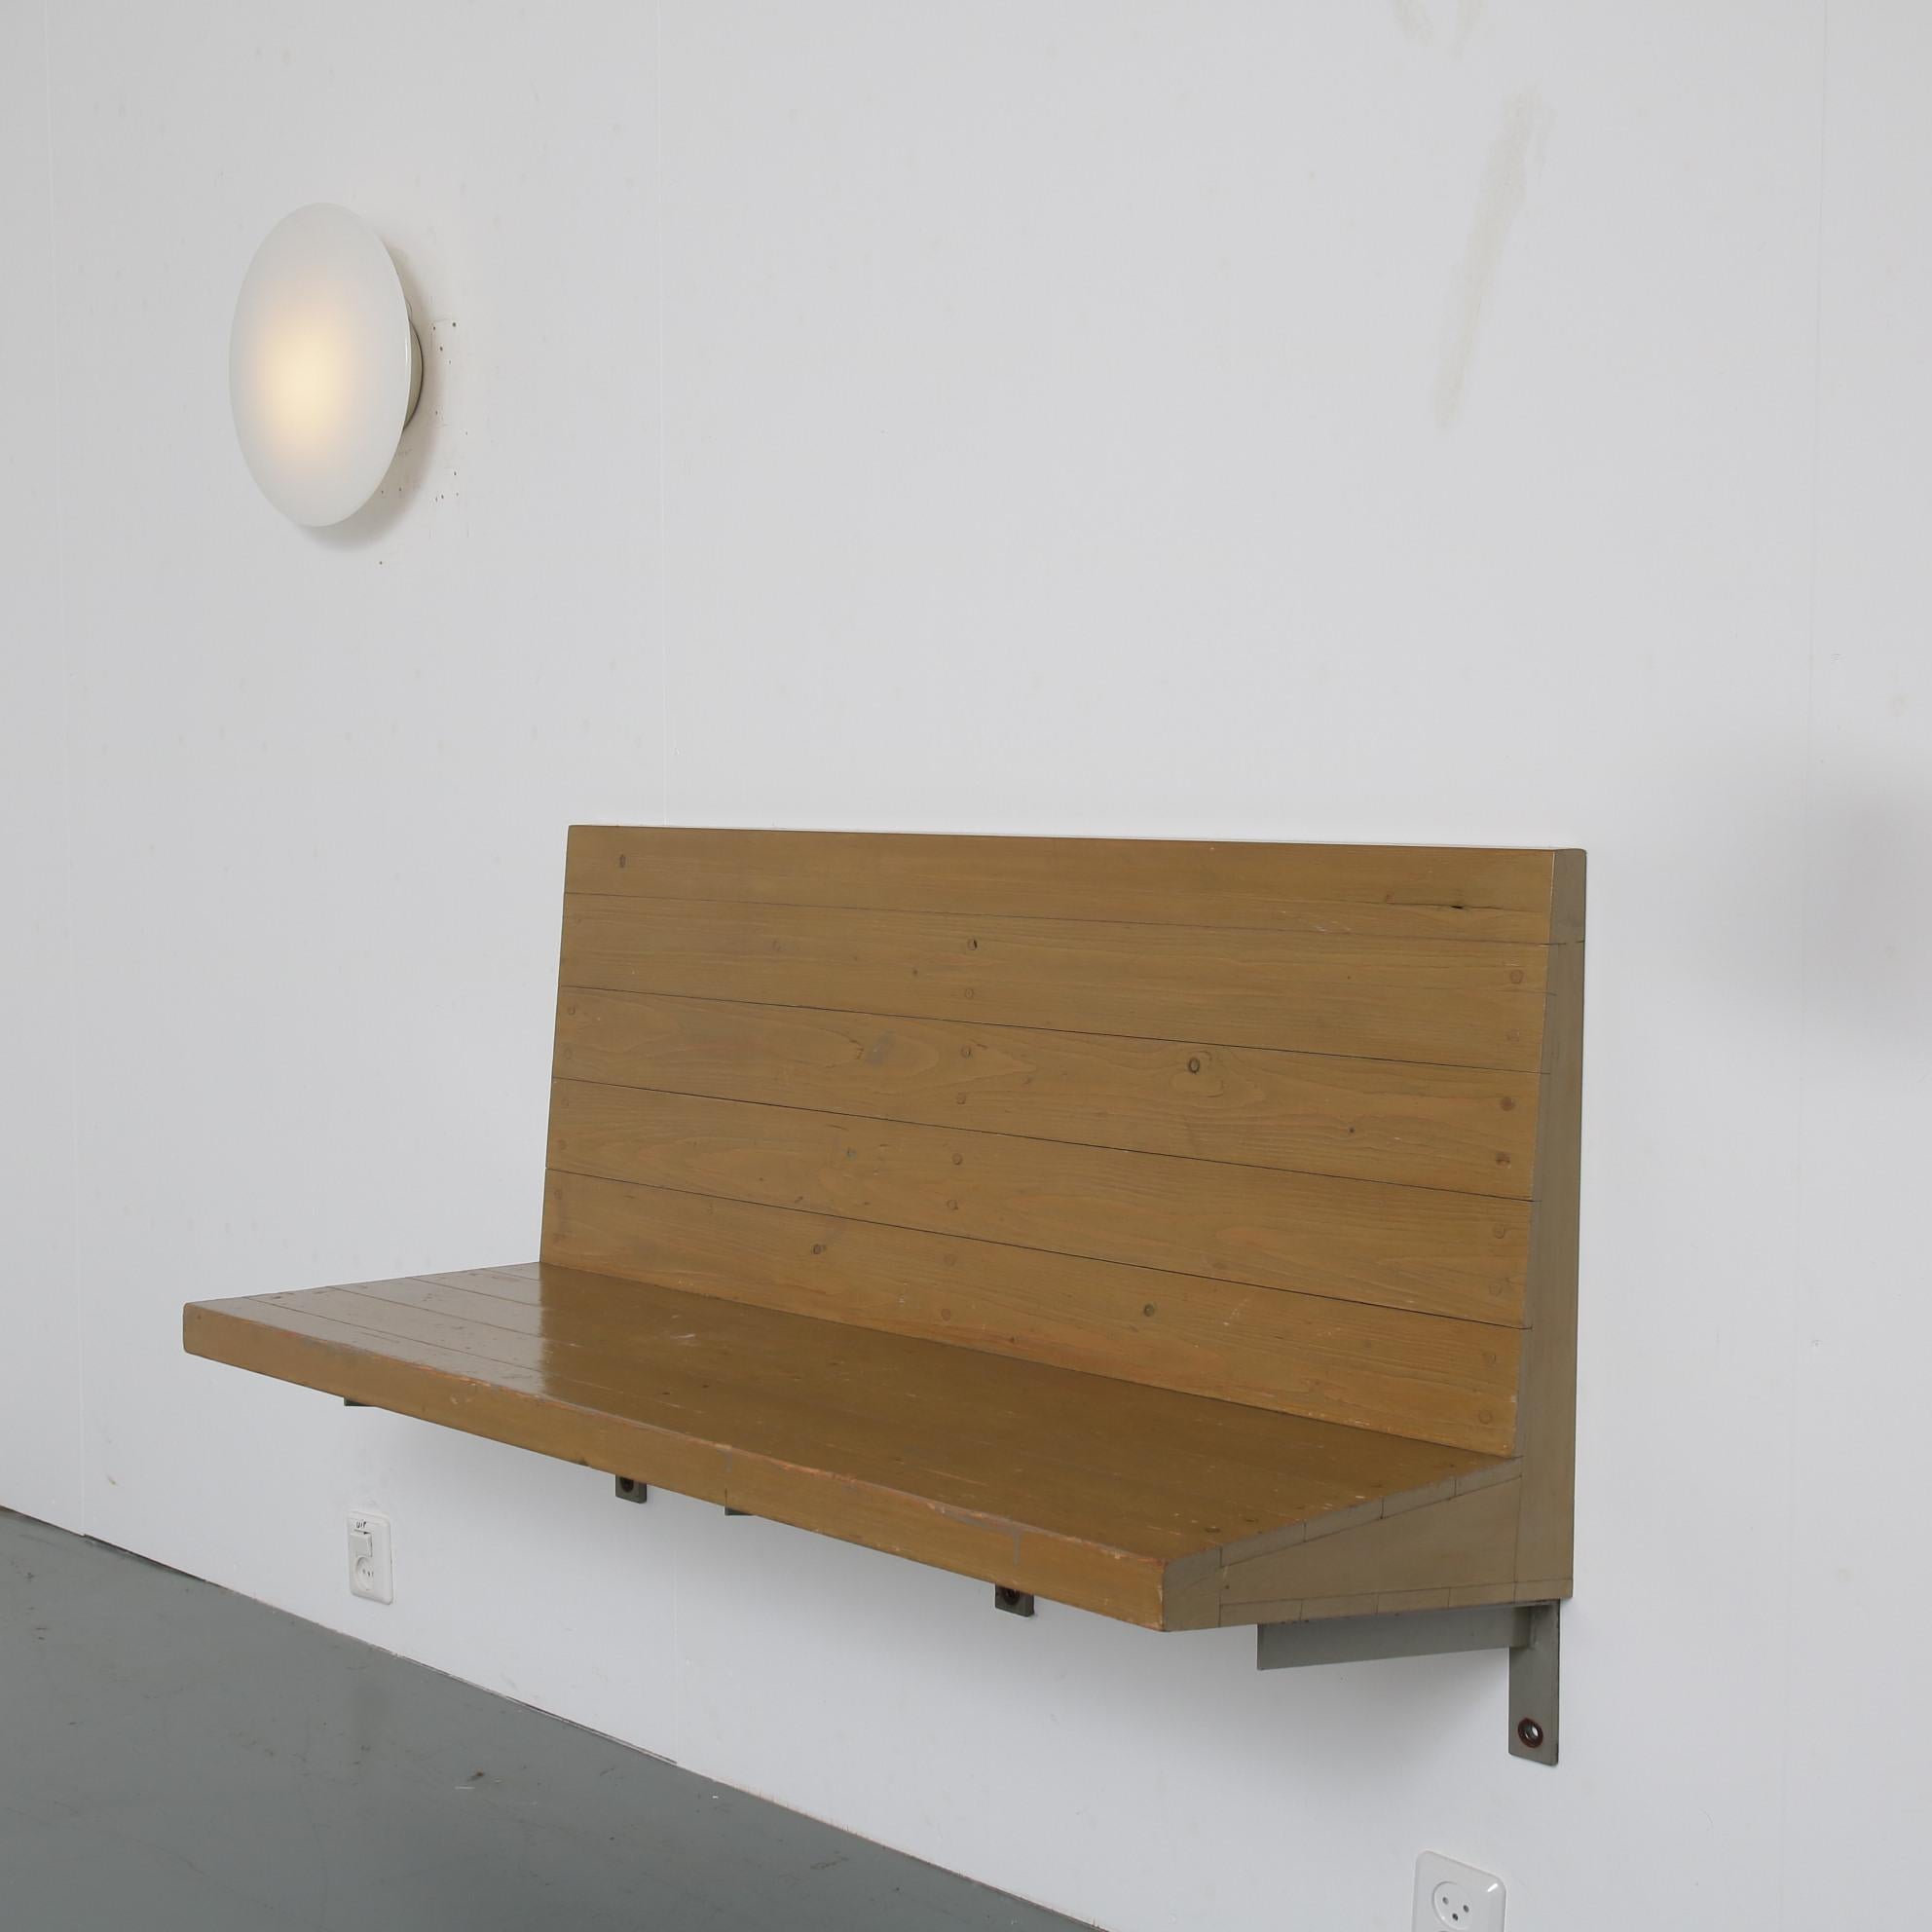 Rare Dom Hans van der Laan Wall Mounted Bench, Netherlands 1970 In Good Condition For Sale In Amsterdam, NL